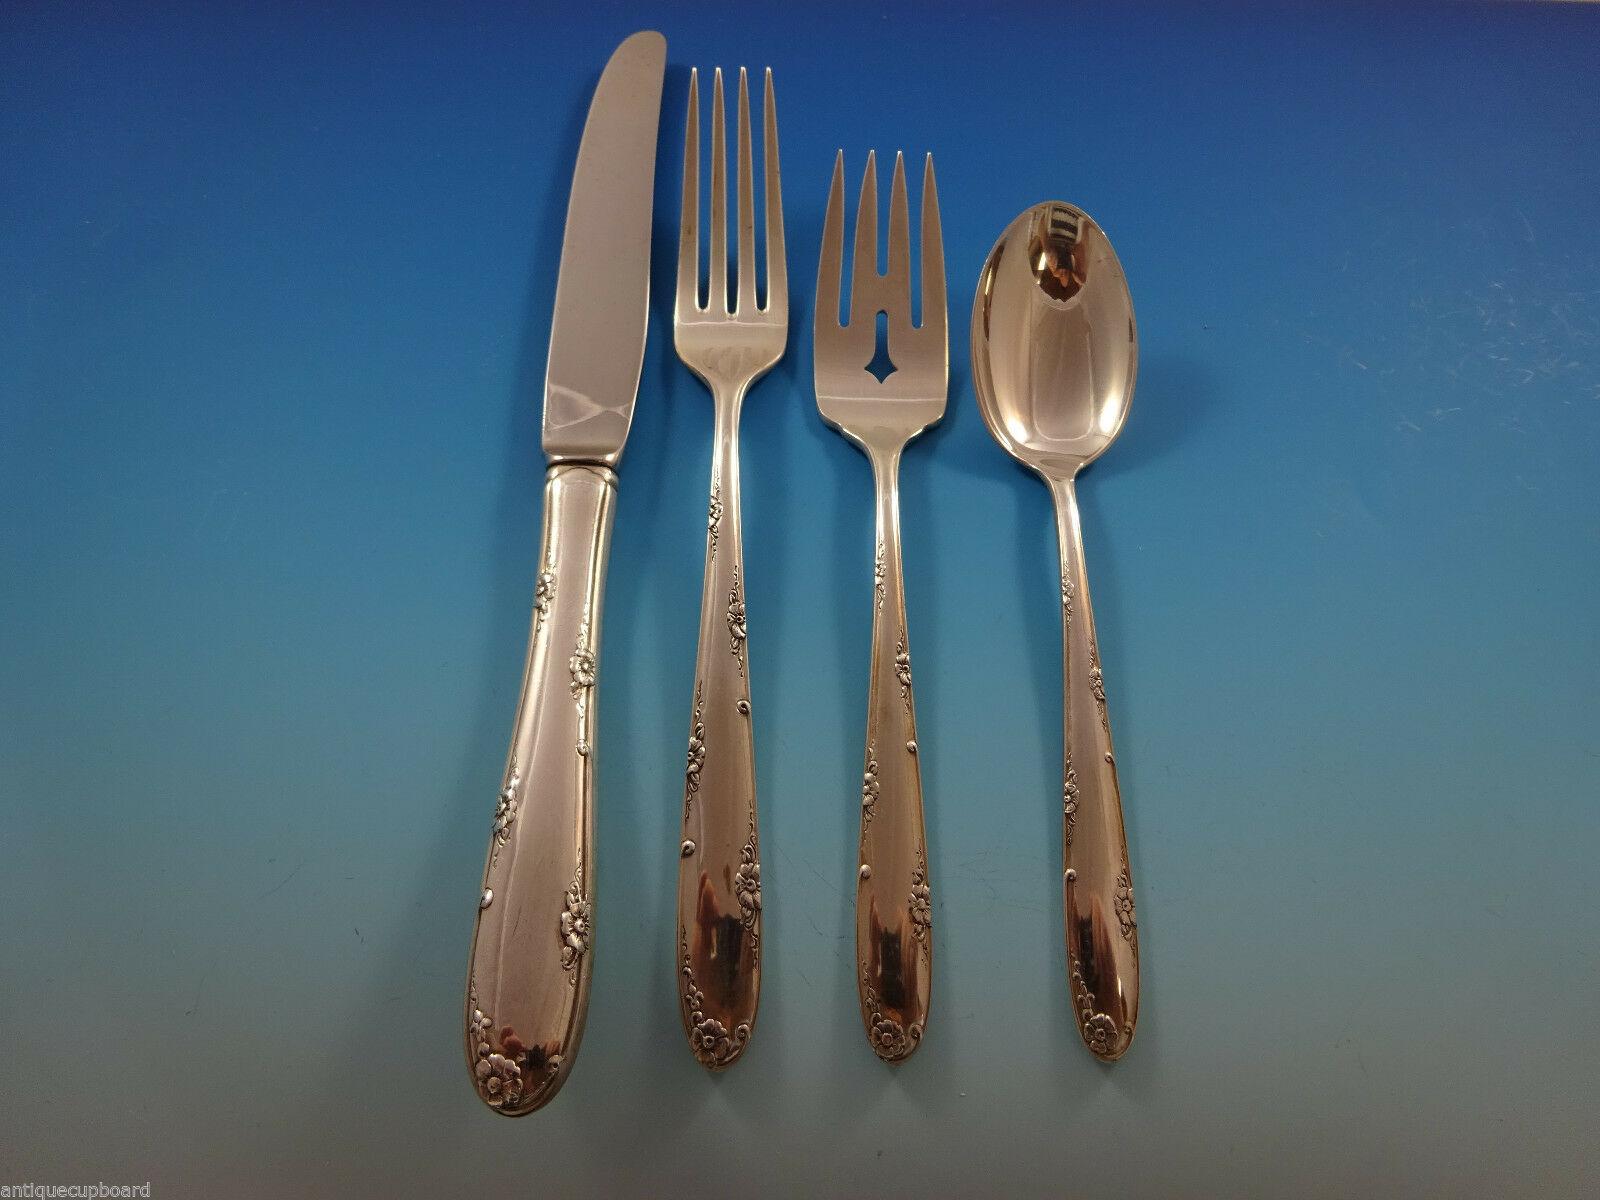 Madeira by Towle sterling silver flatware set - 32 pieces. This set includes:

8 knives, 9